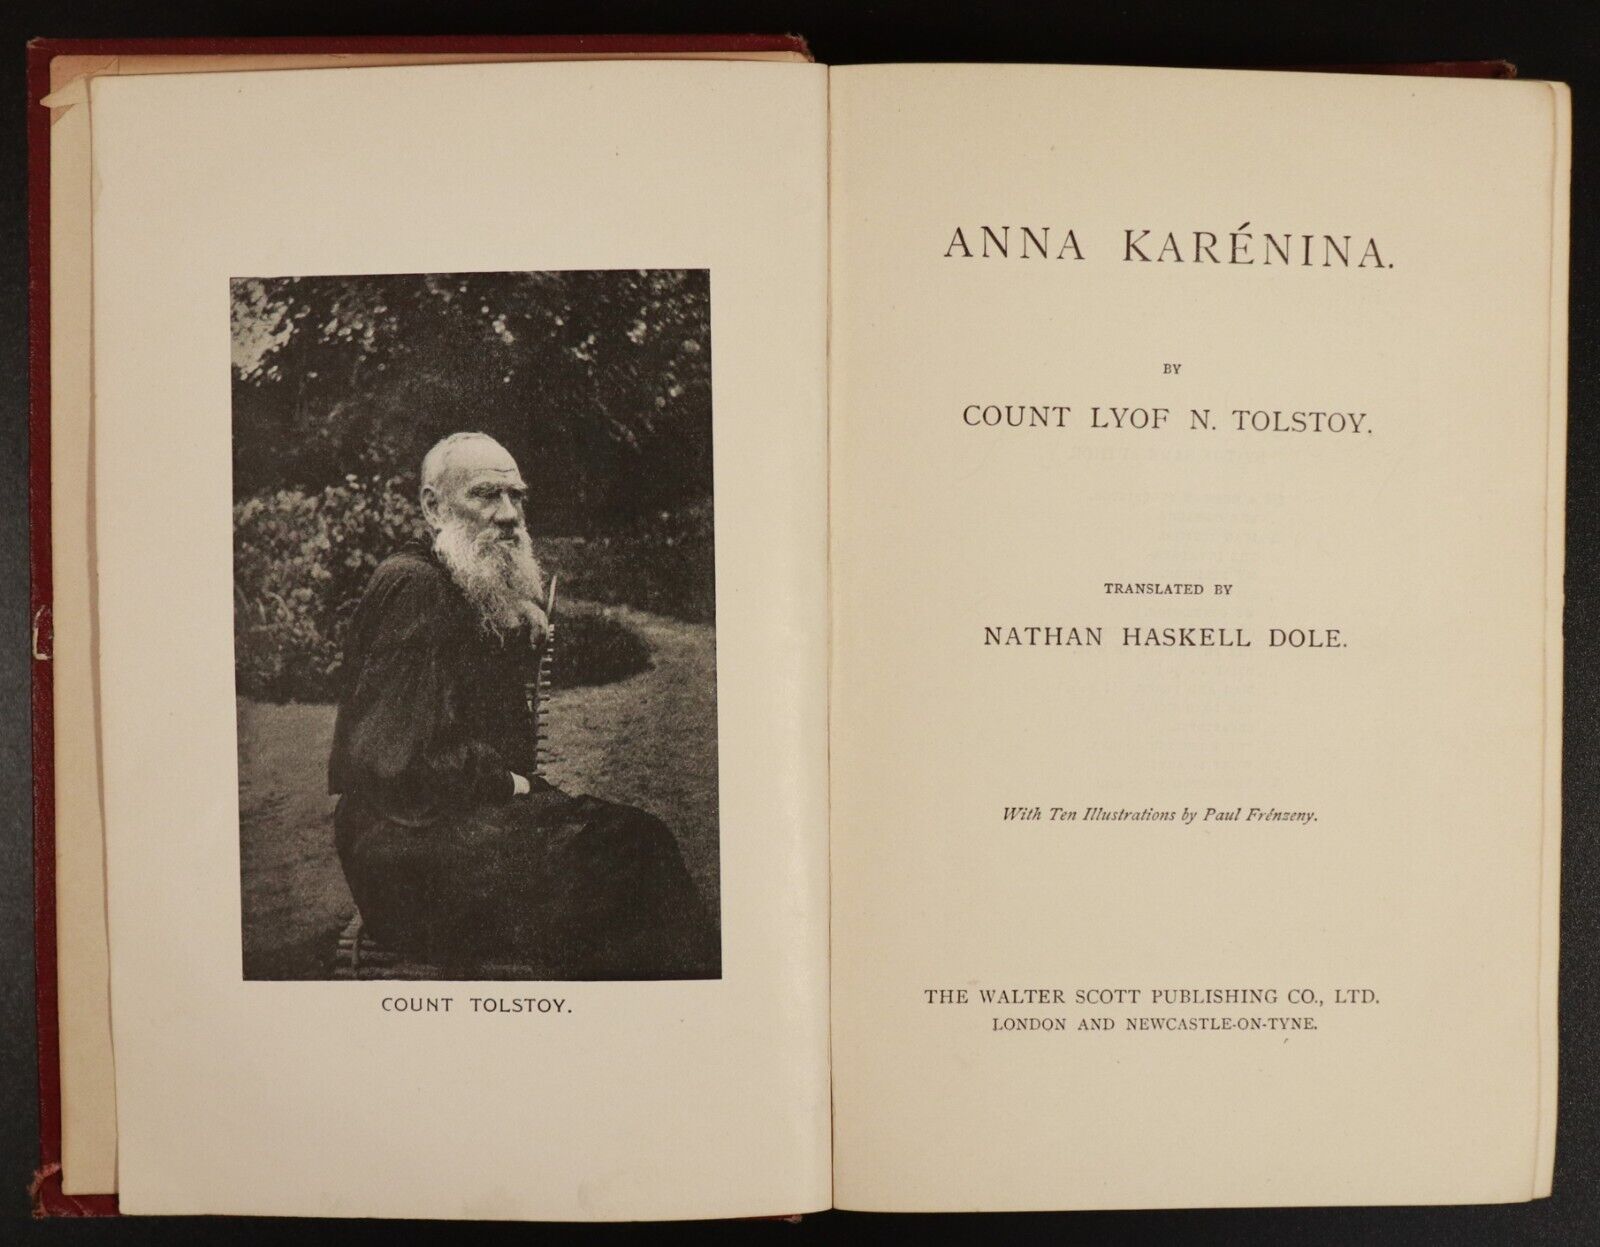 c1900 Anna Karenina by Count Lyof N. Tolstoy Antique Classic Fiction Book - 0